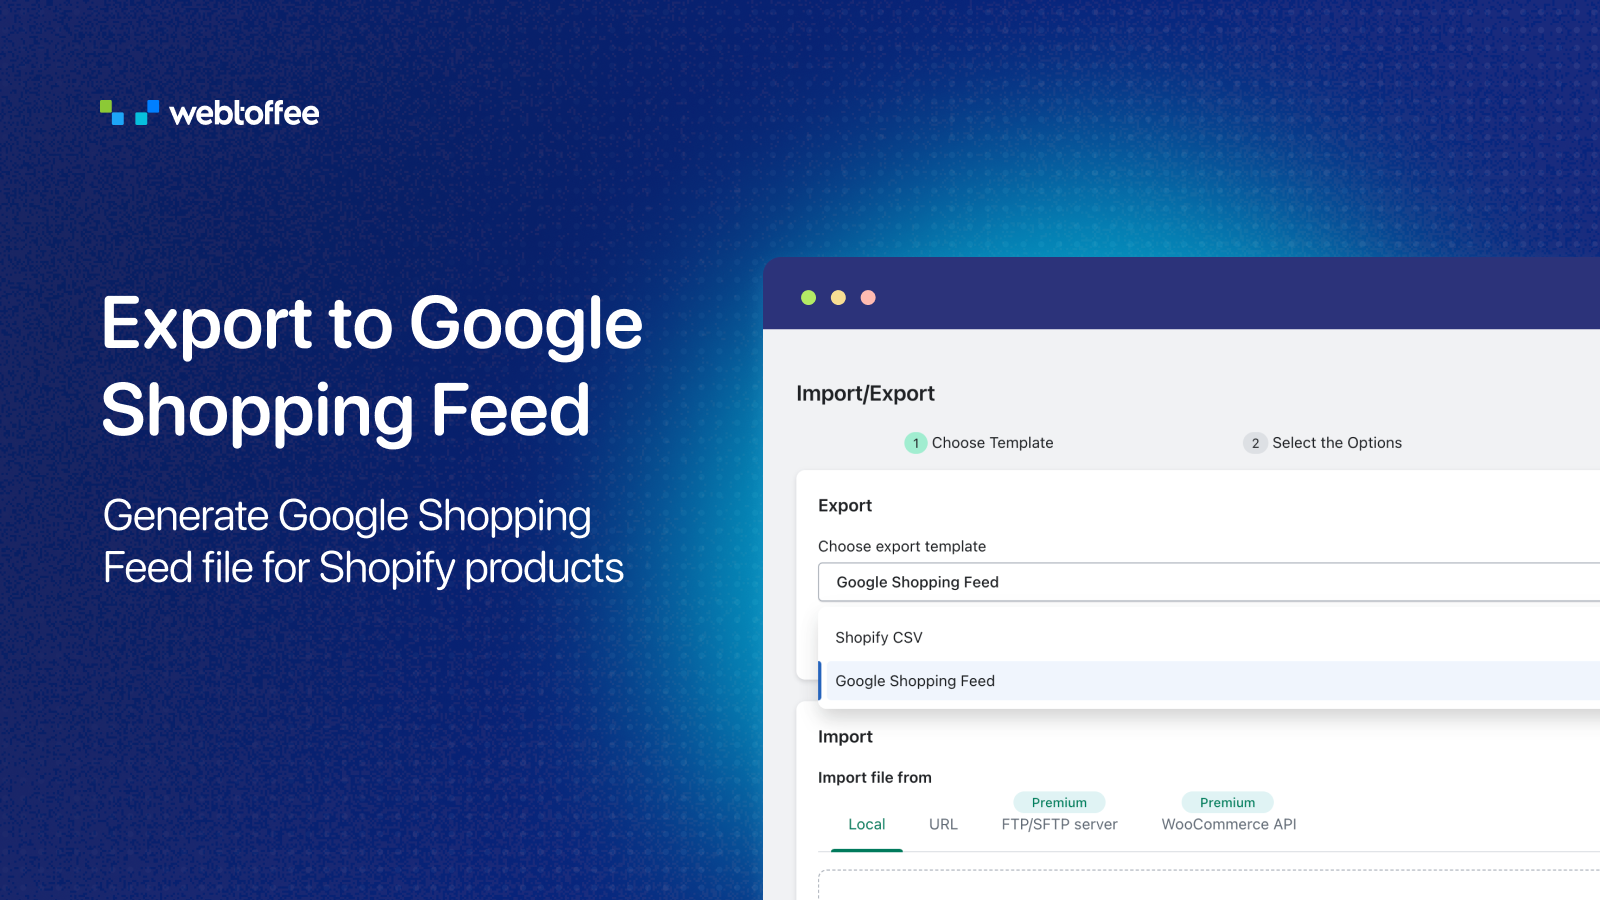 Export to Google Shopping Feed